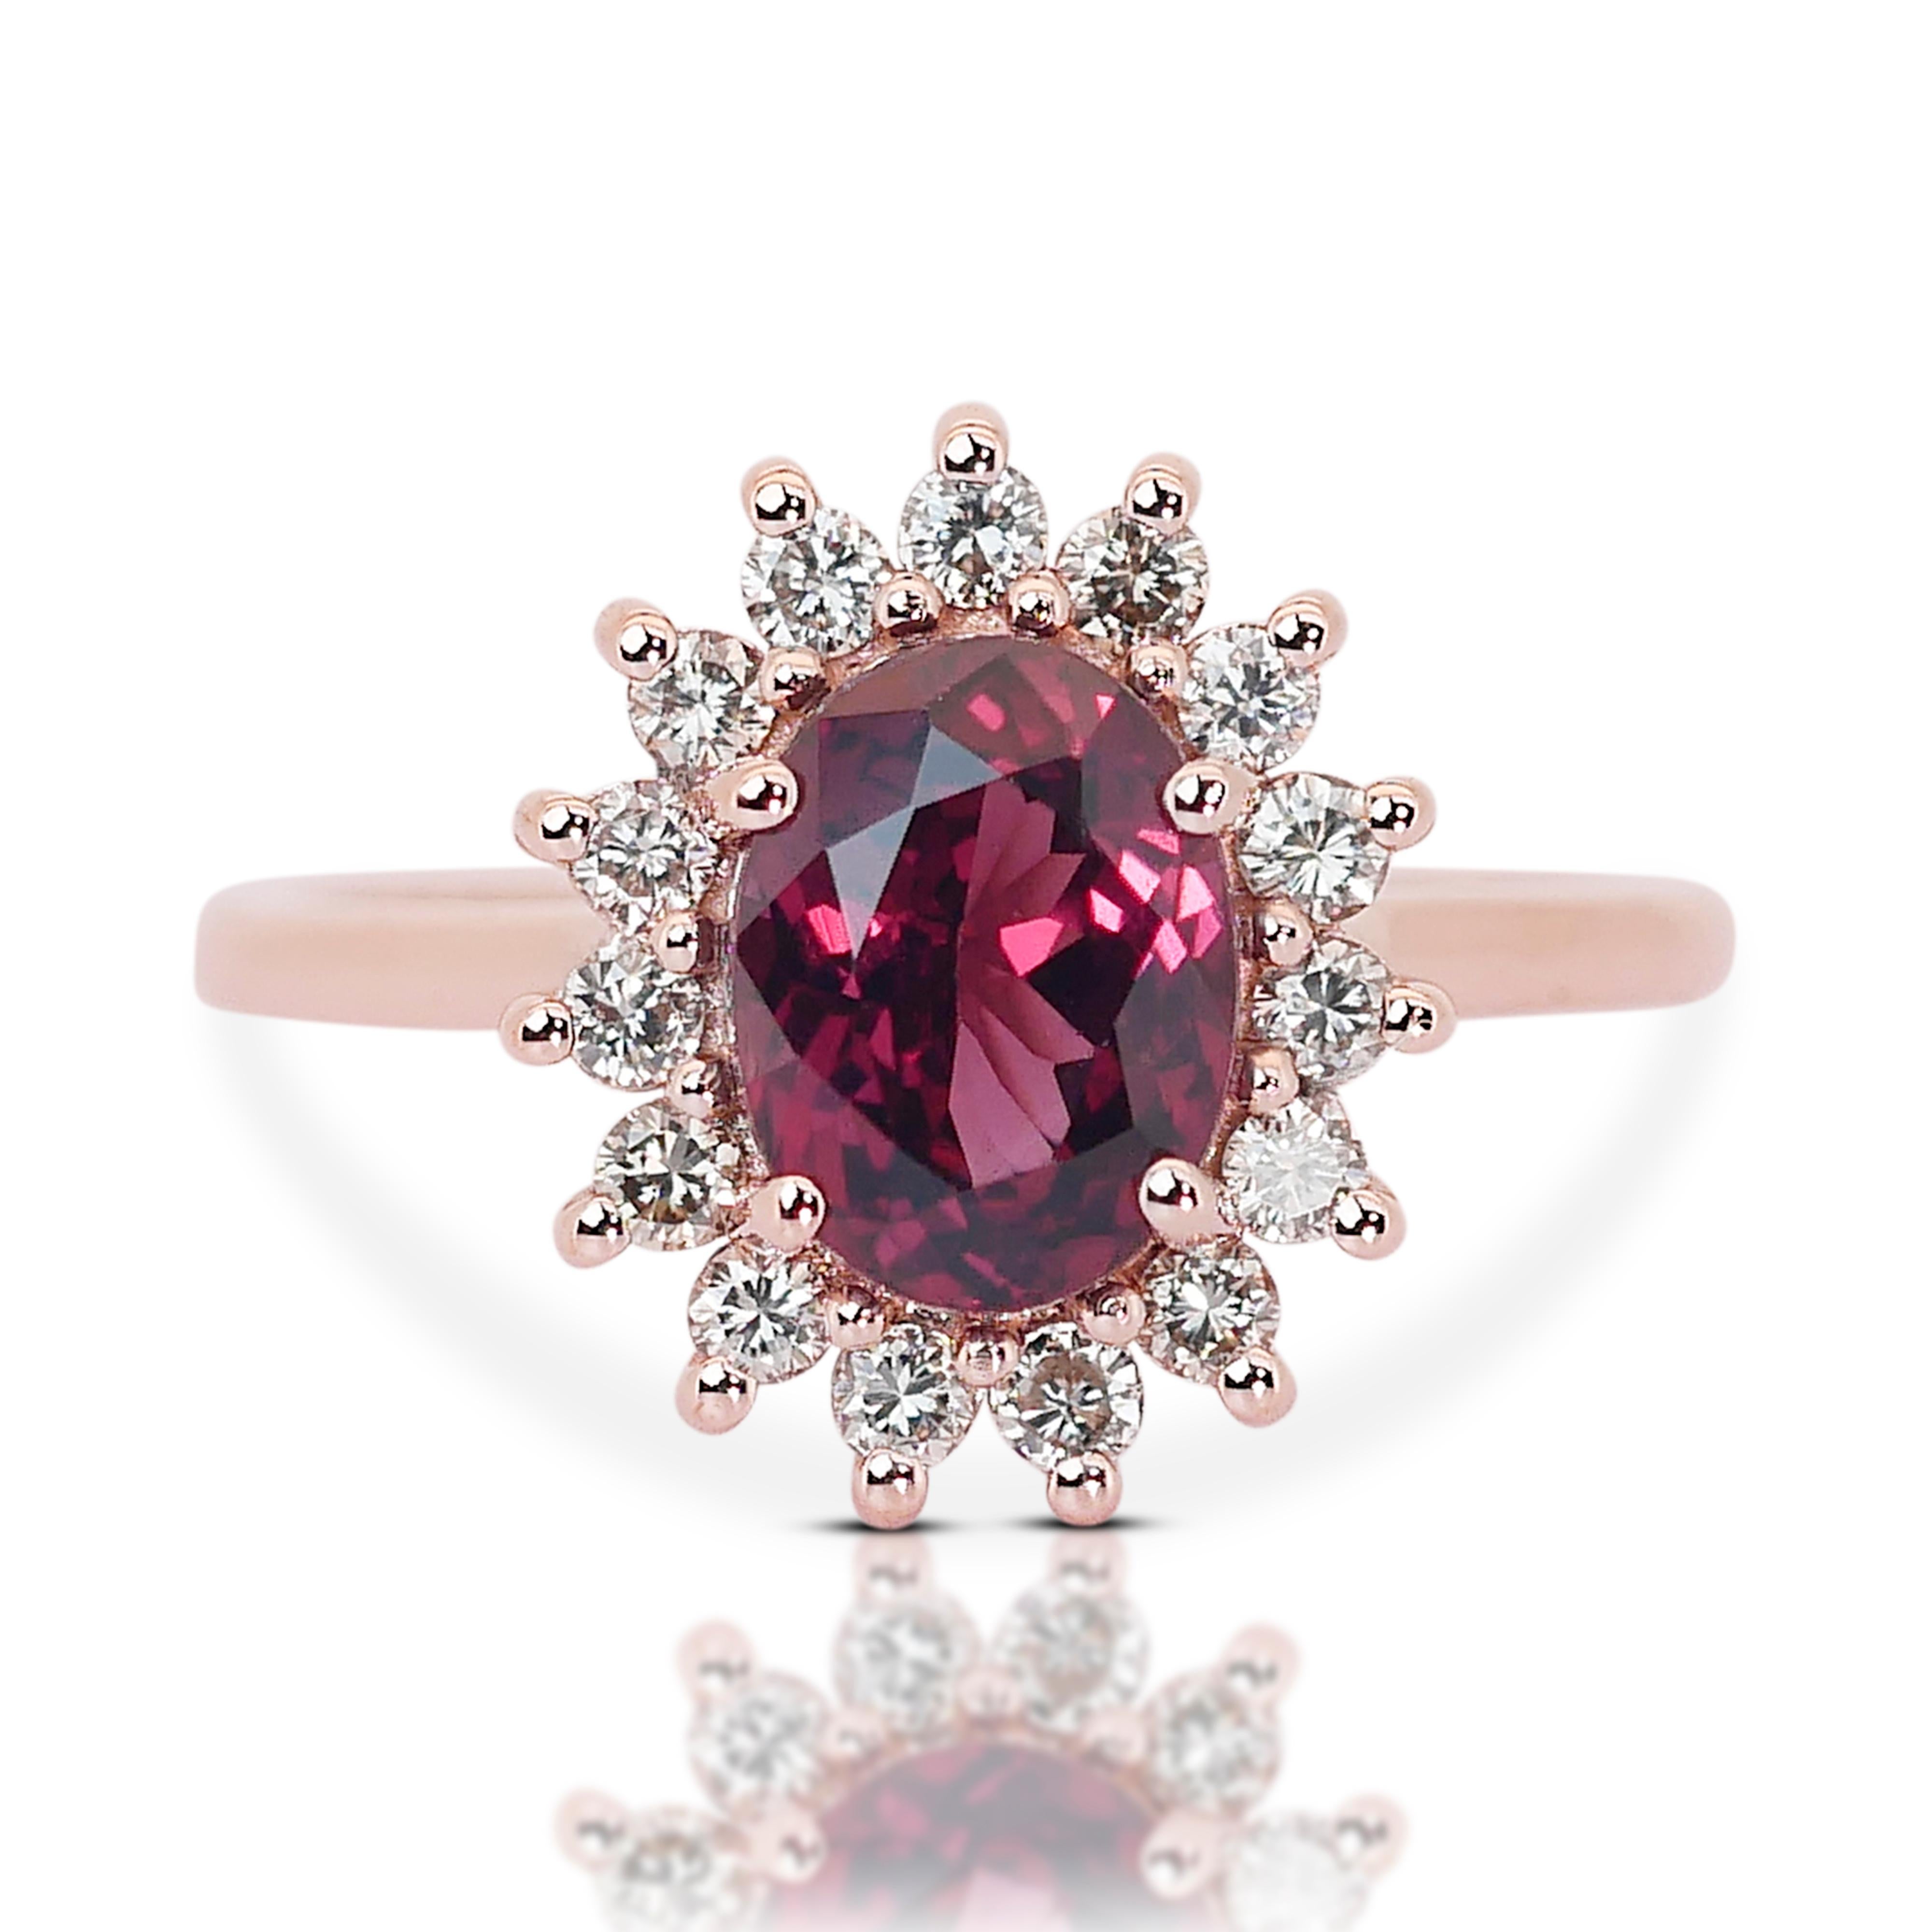 Enchanting 14K Pink Gold Garnet and Natural Diamond Ring w/2.32ct 

At the heart of this enchanting ring gleams a magnificent Garnet main stone, boasting an impressive weight of 2.01 carats. The mixed cut of the stone enhances its brilliance and